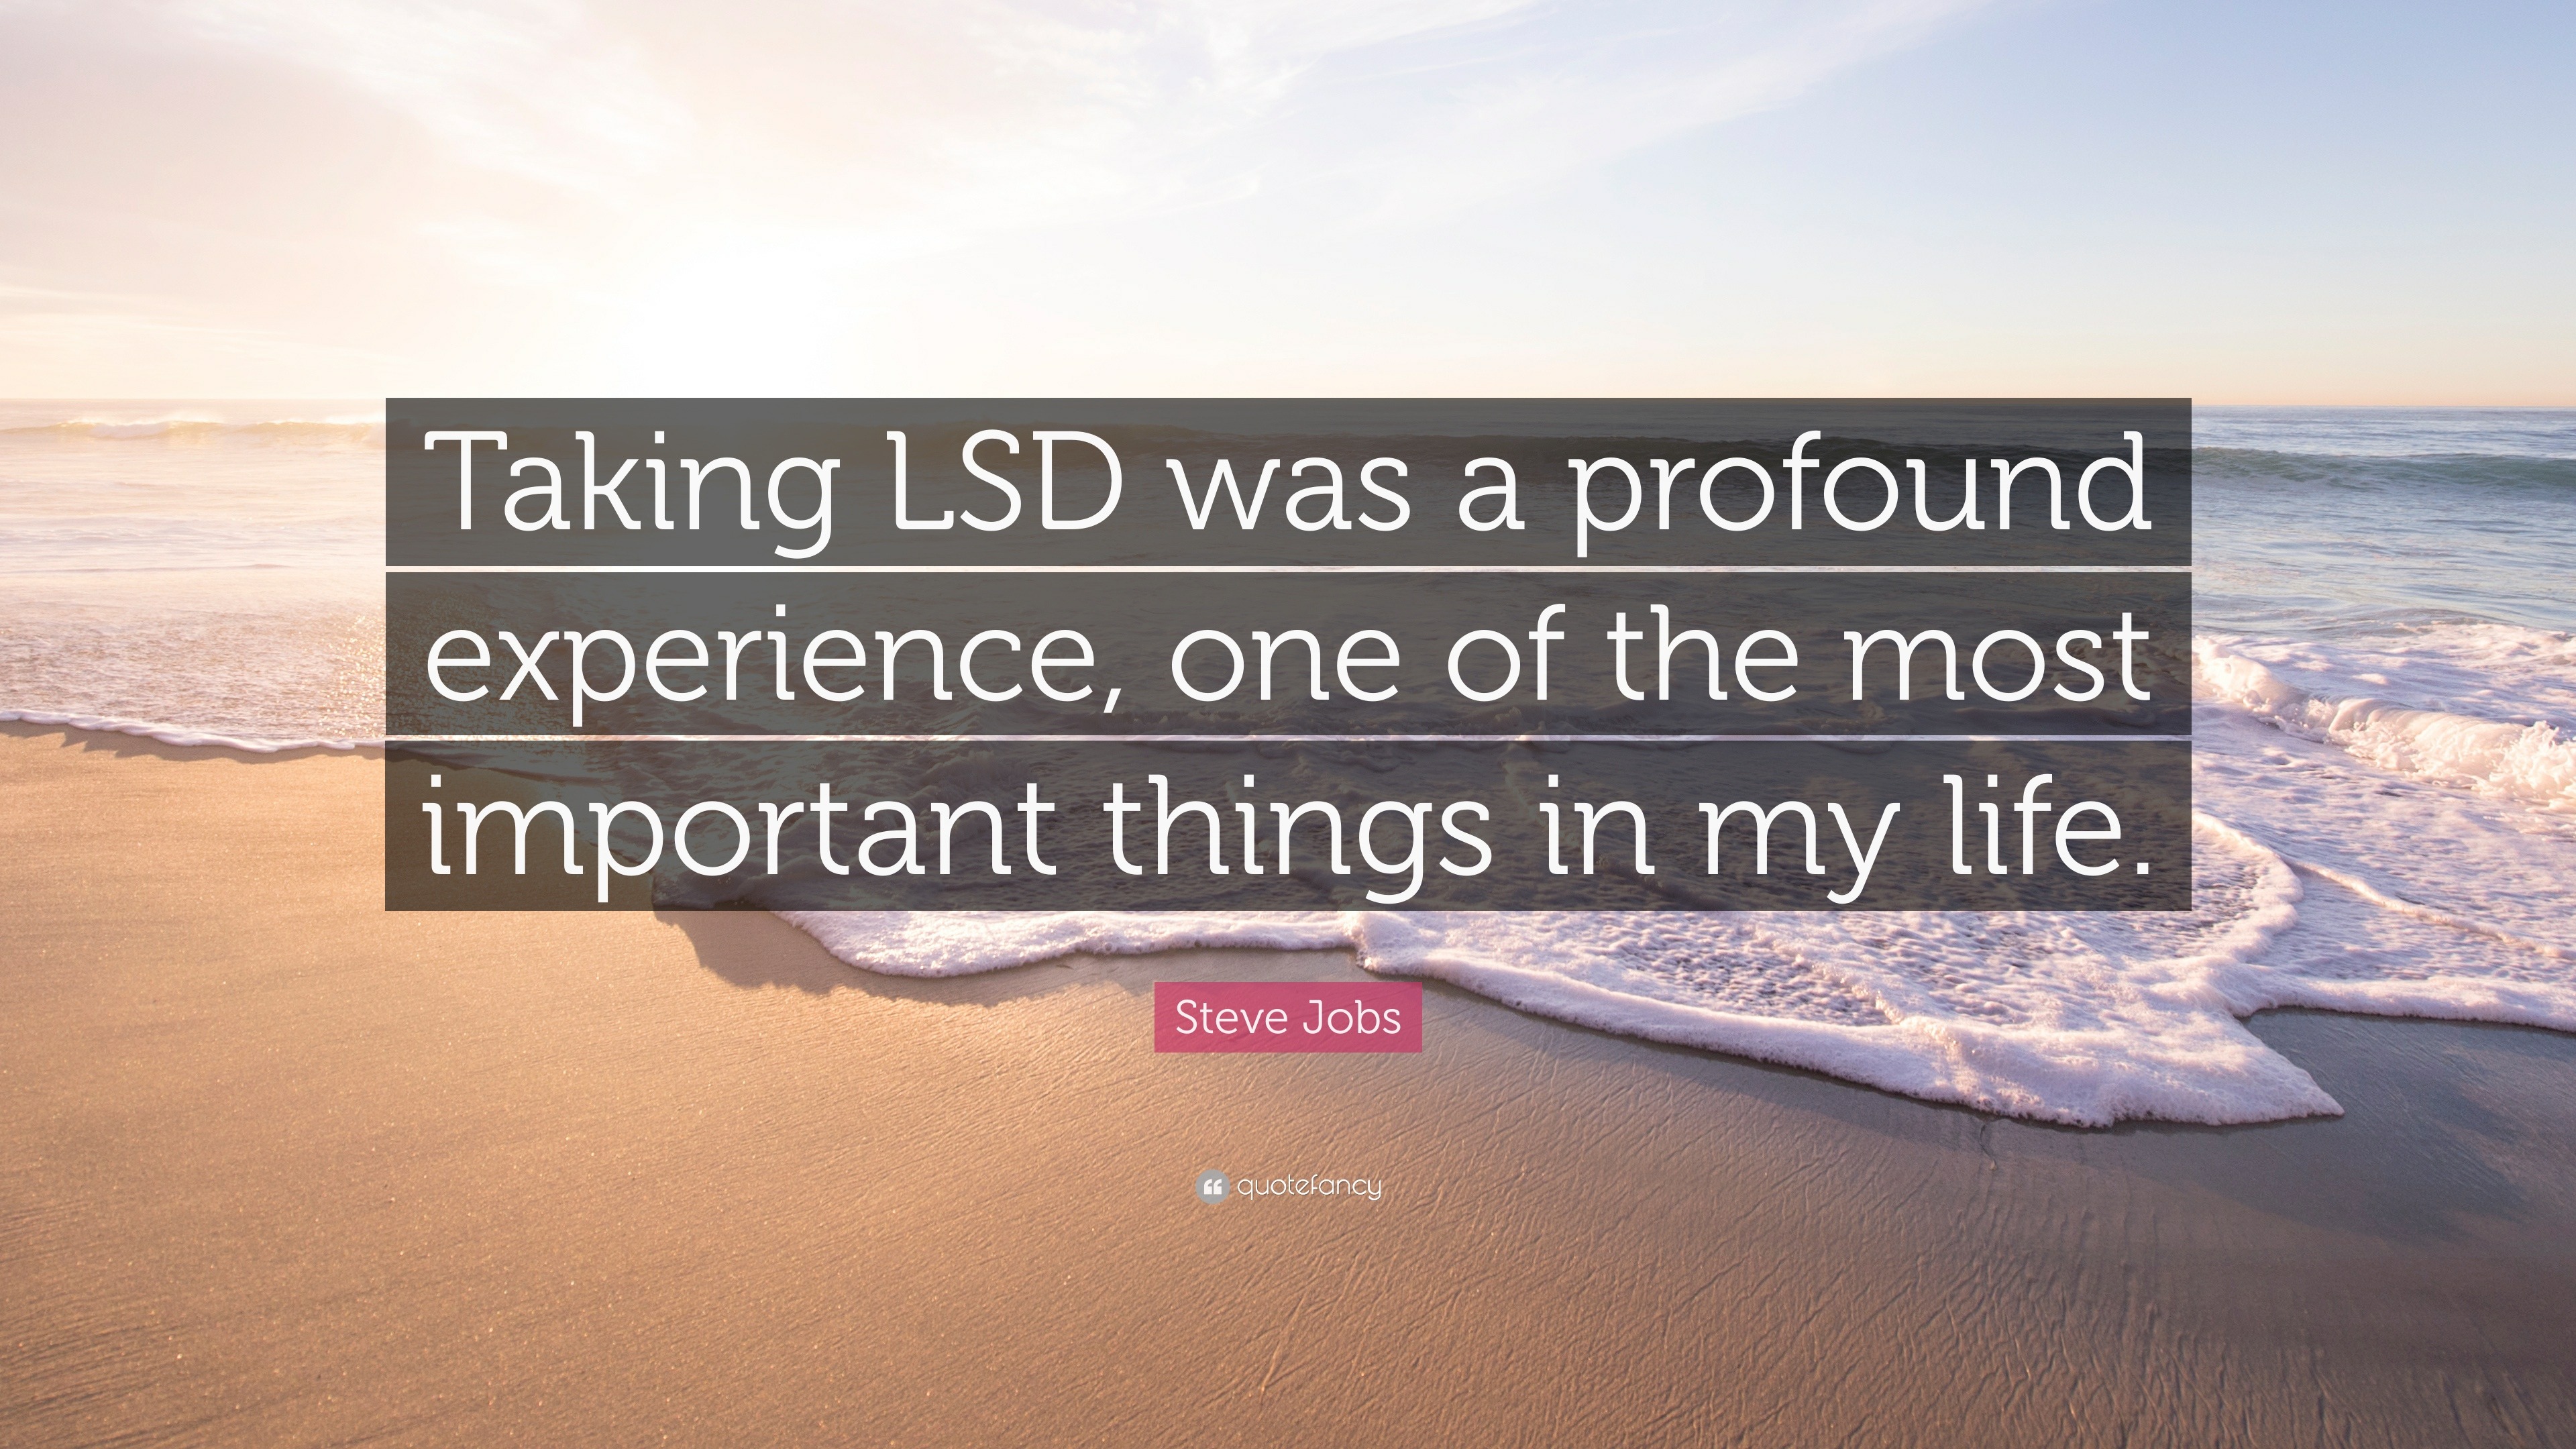 Steve Jobs Quote “Taking LSD was a profound experience one of the most